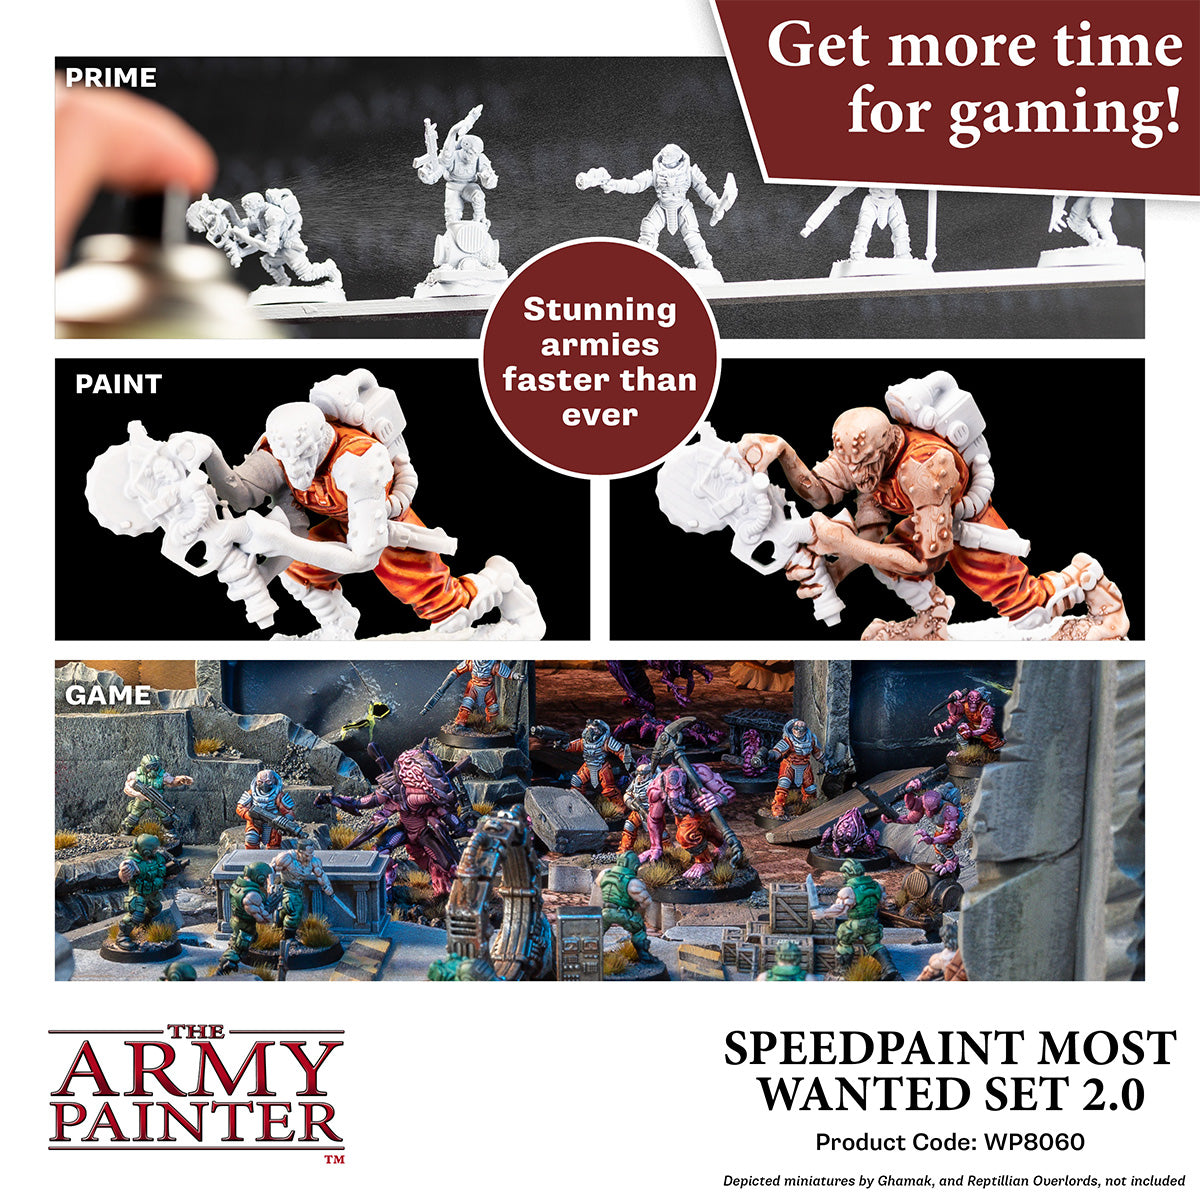  The Army Painter Speedpaint Most Wanted Set 2.0+